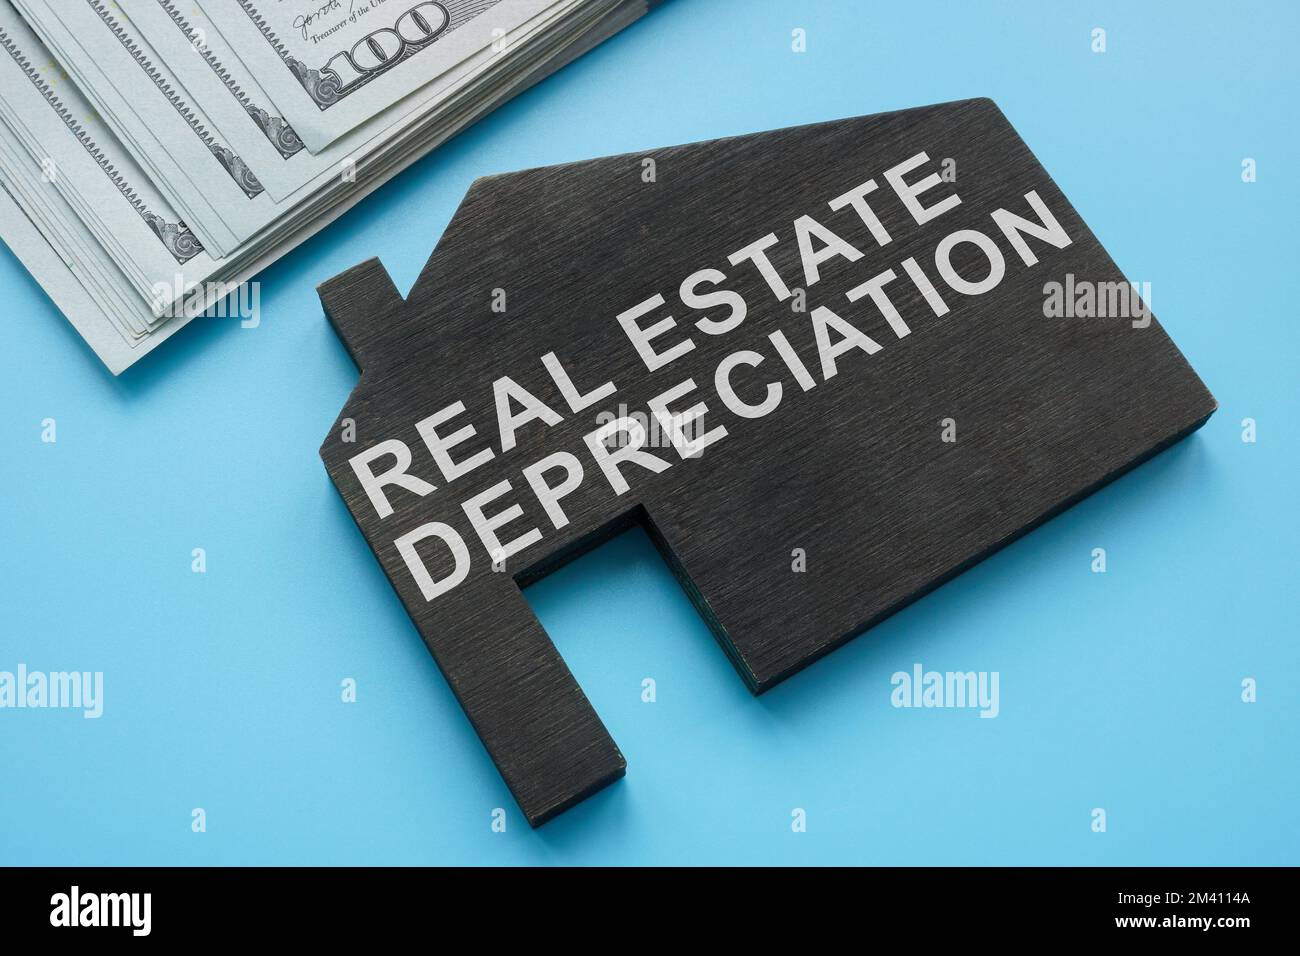 Real estate depreciation sign on the model of house. Stock Photo